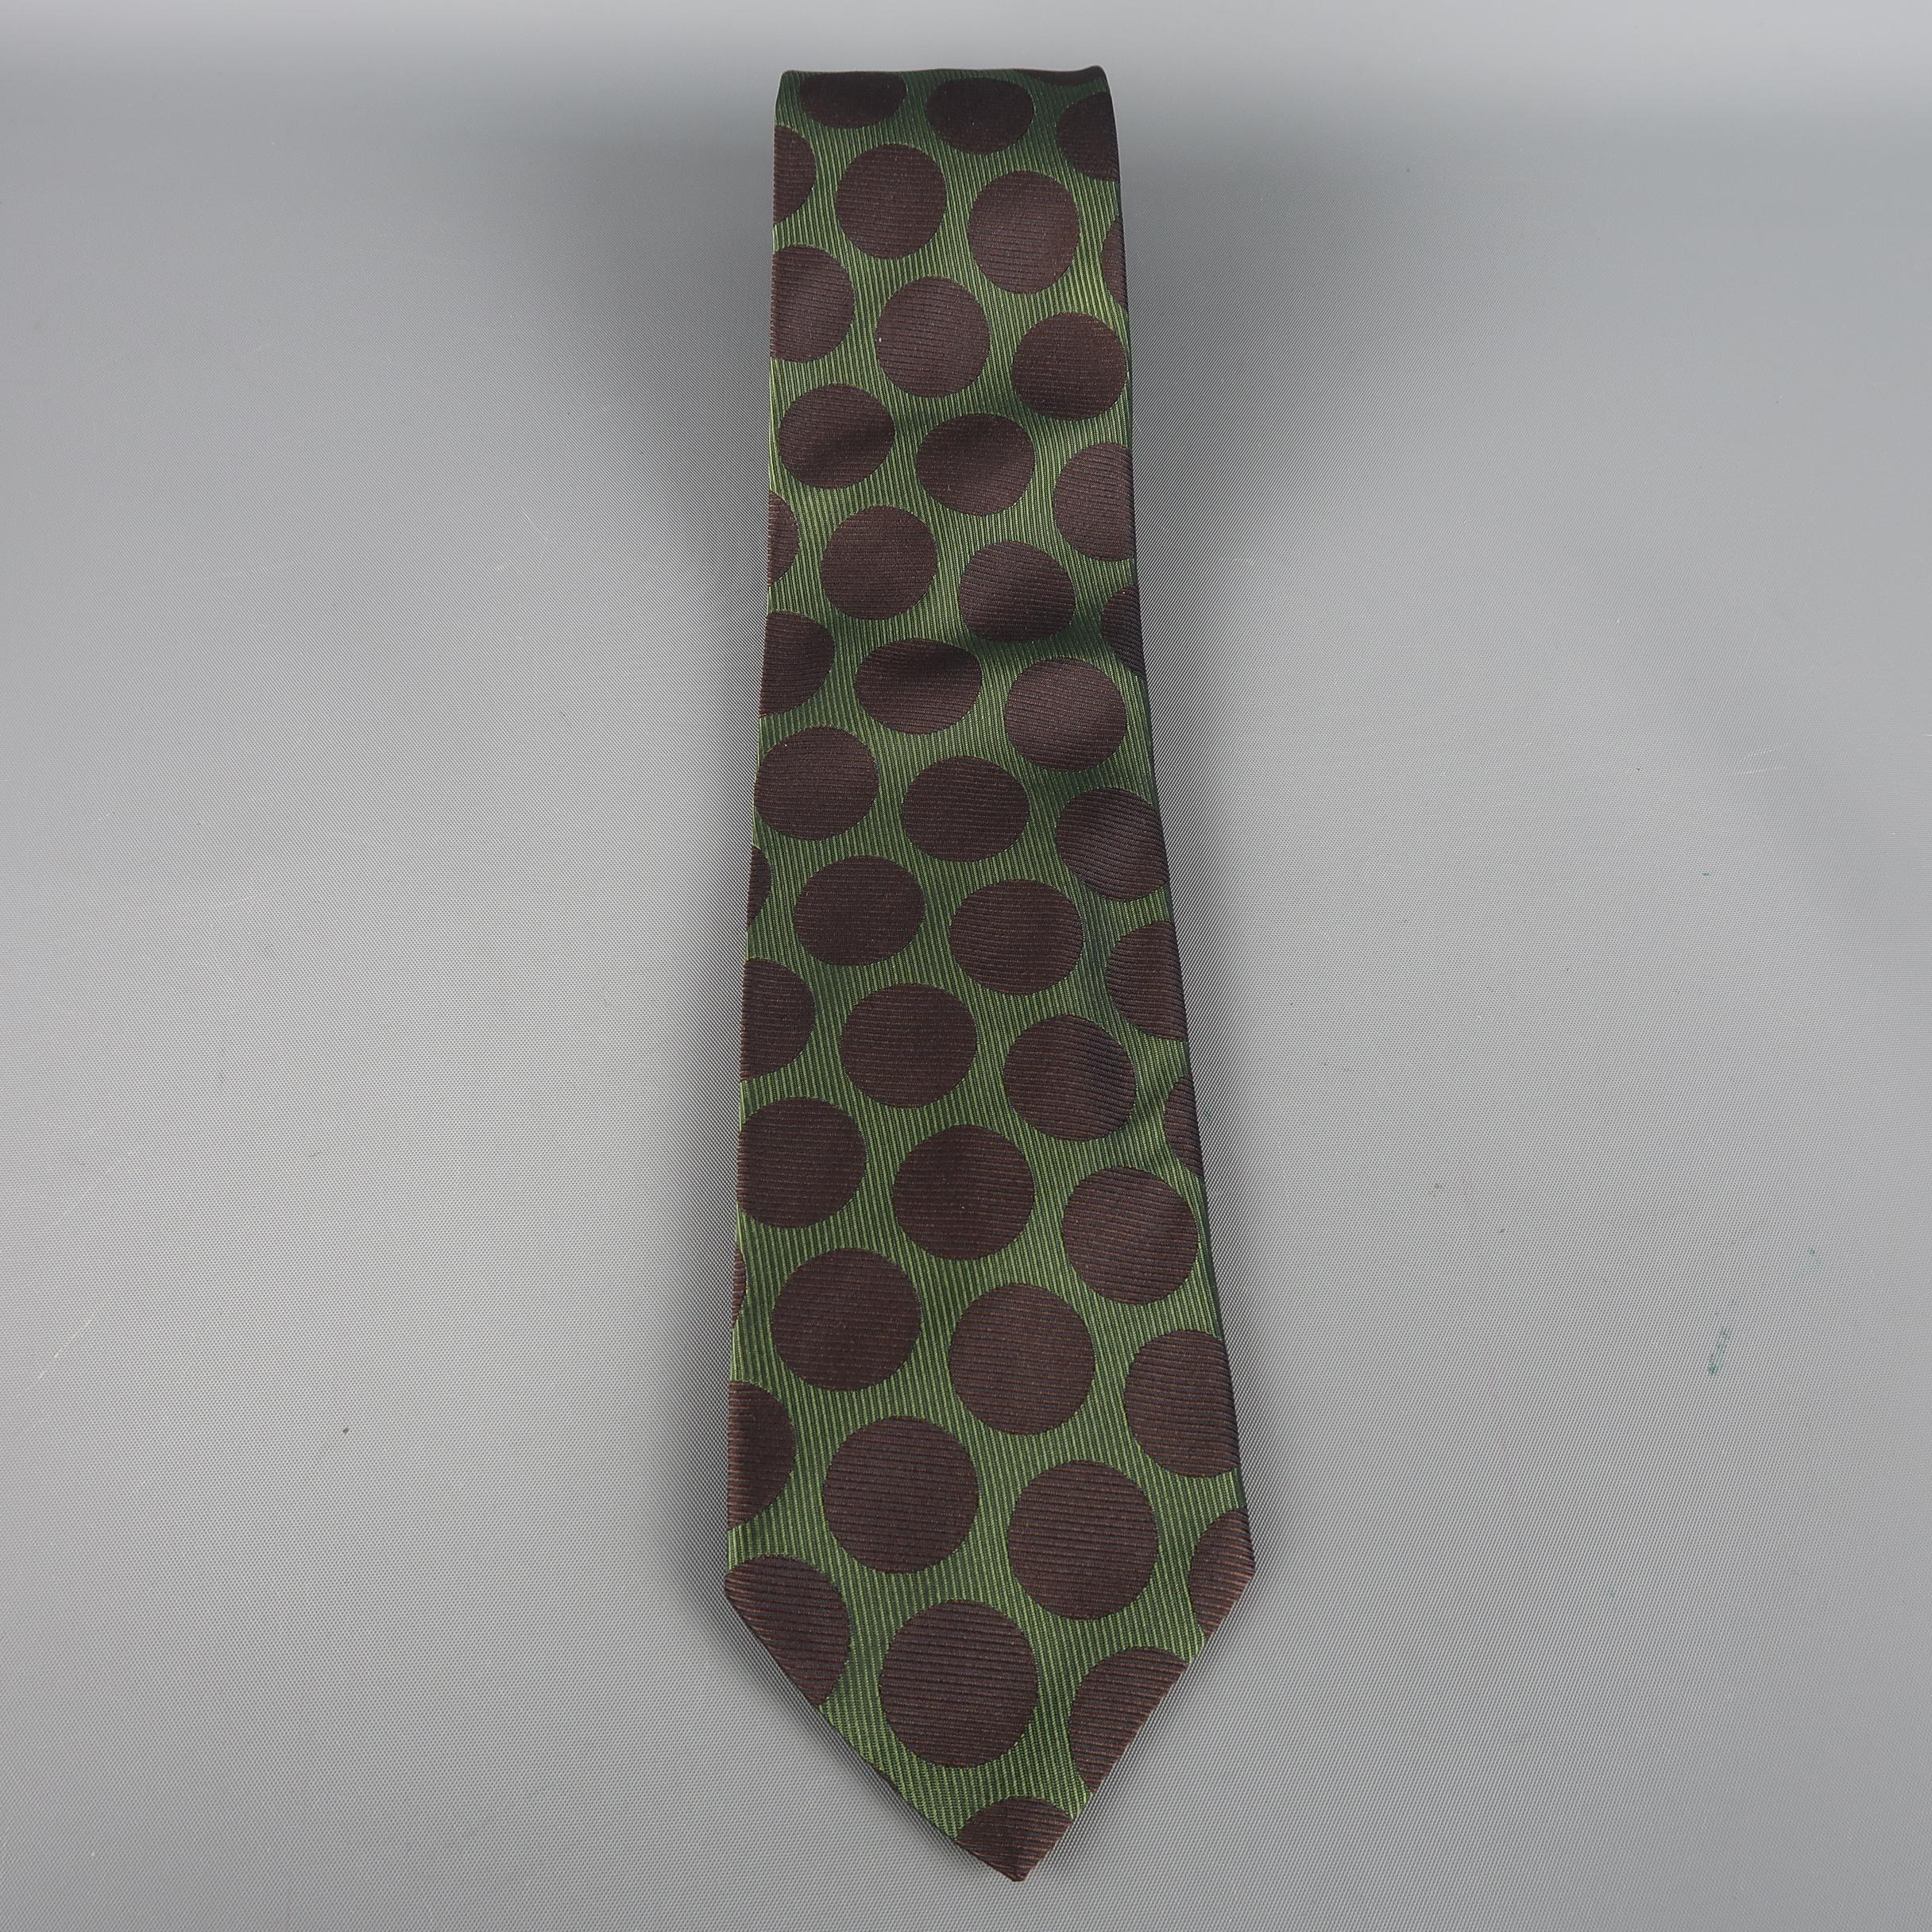 CHARVET tie come in olive and brown silk  with all over woven polka dots. Made in France.
 
Excellent Pre-Owned Condition.
 
Width: 3.5 in.